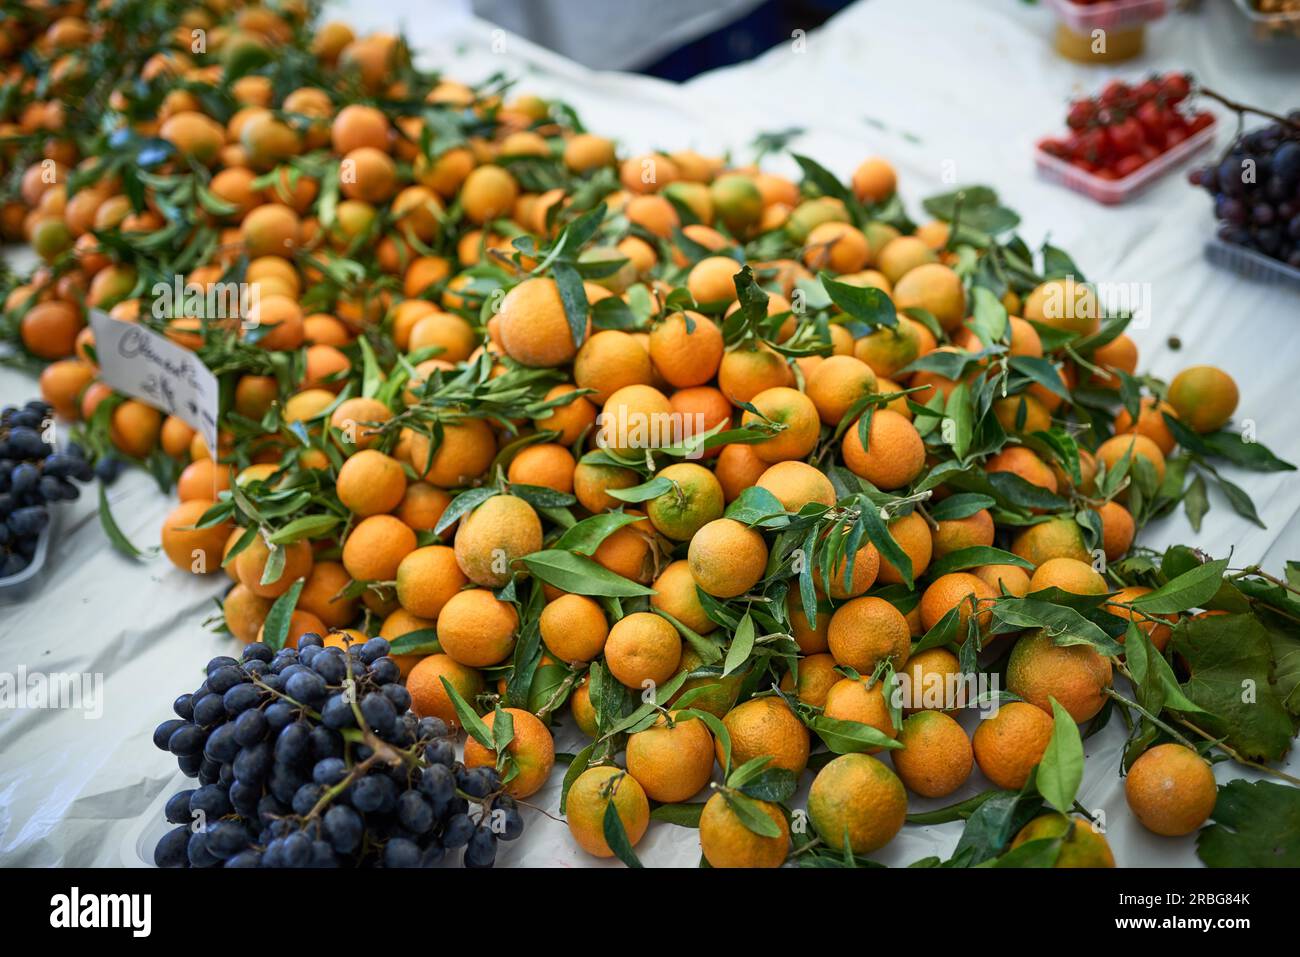 Fresh clementines with green leaves on sale at a farmers market or store piled high on a table Stock Photo